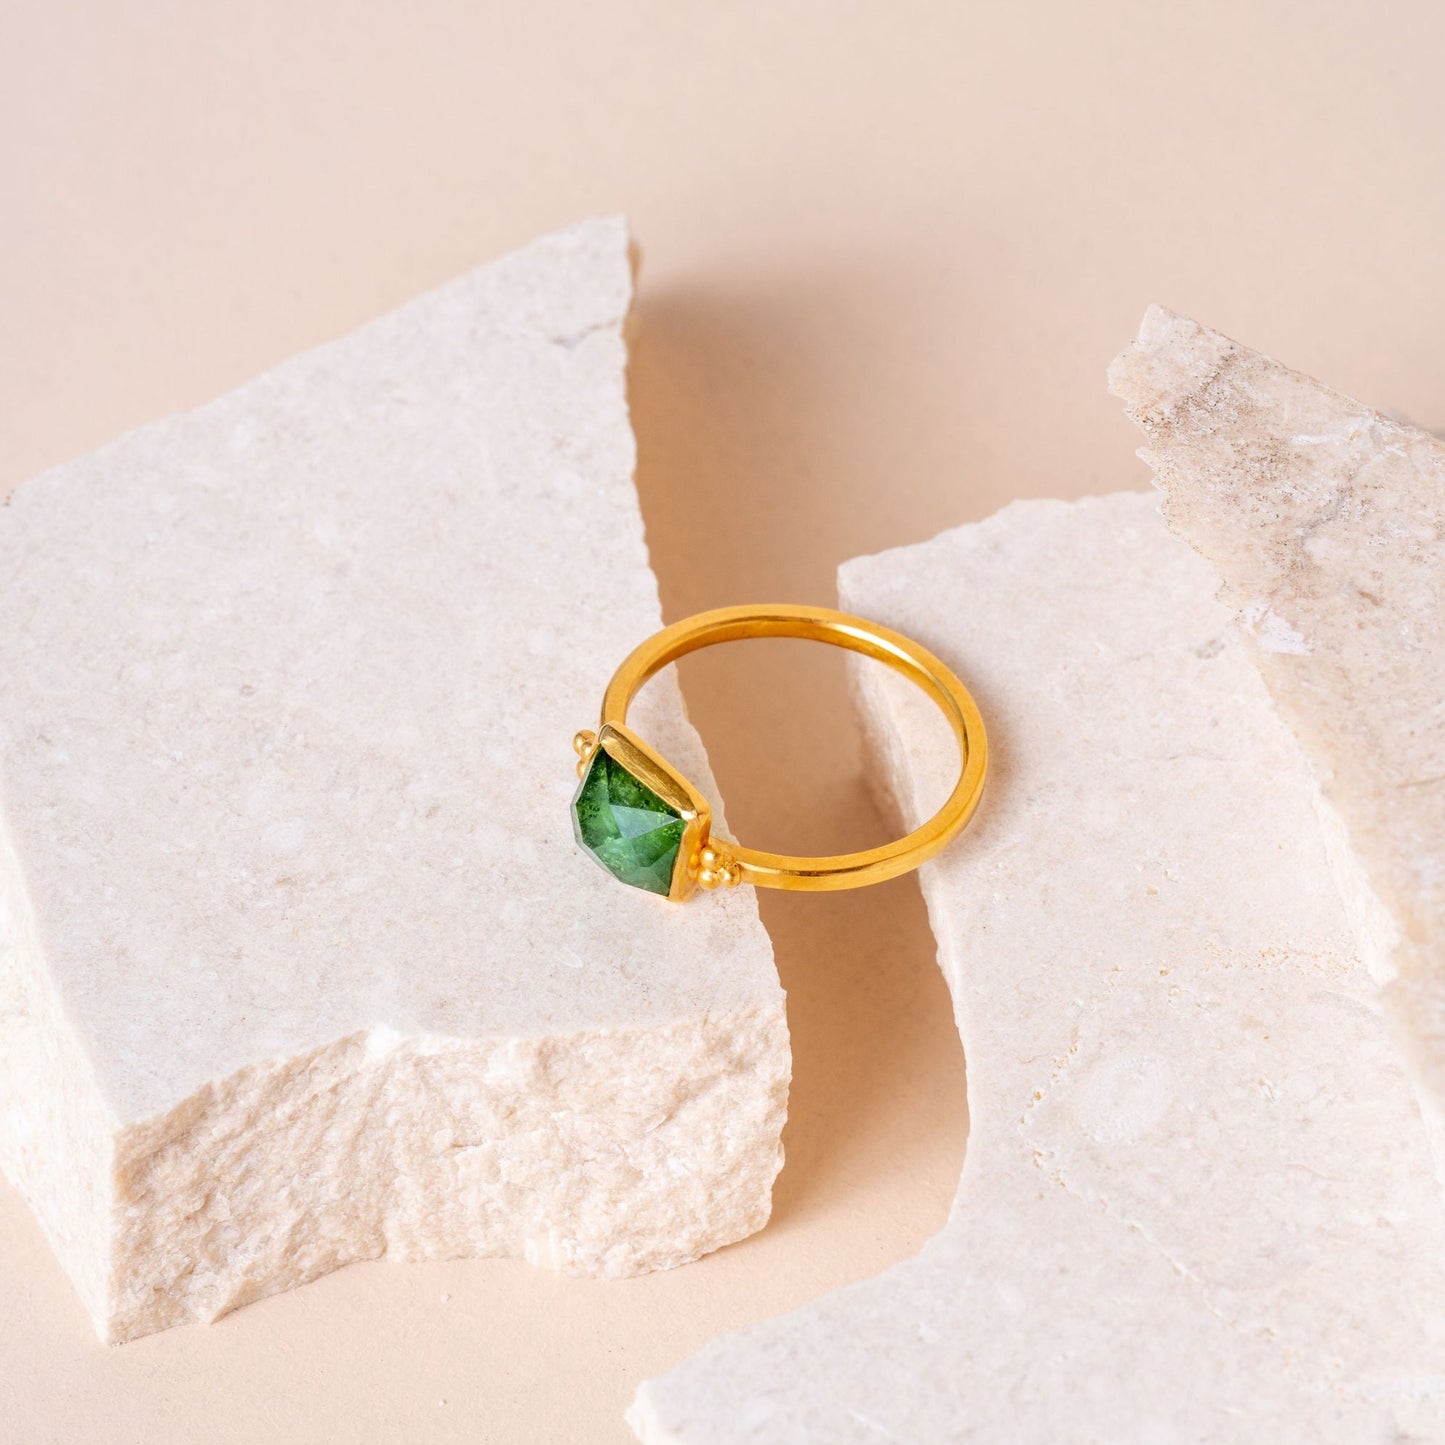 Elegant hand crafted gold vermeil ring, with granulation accents, featuring a captivating green rose-cut square tourmaline.